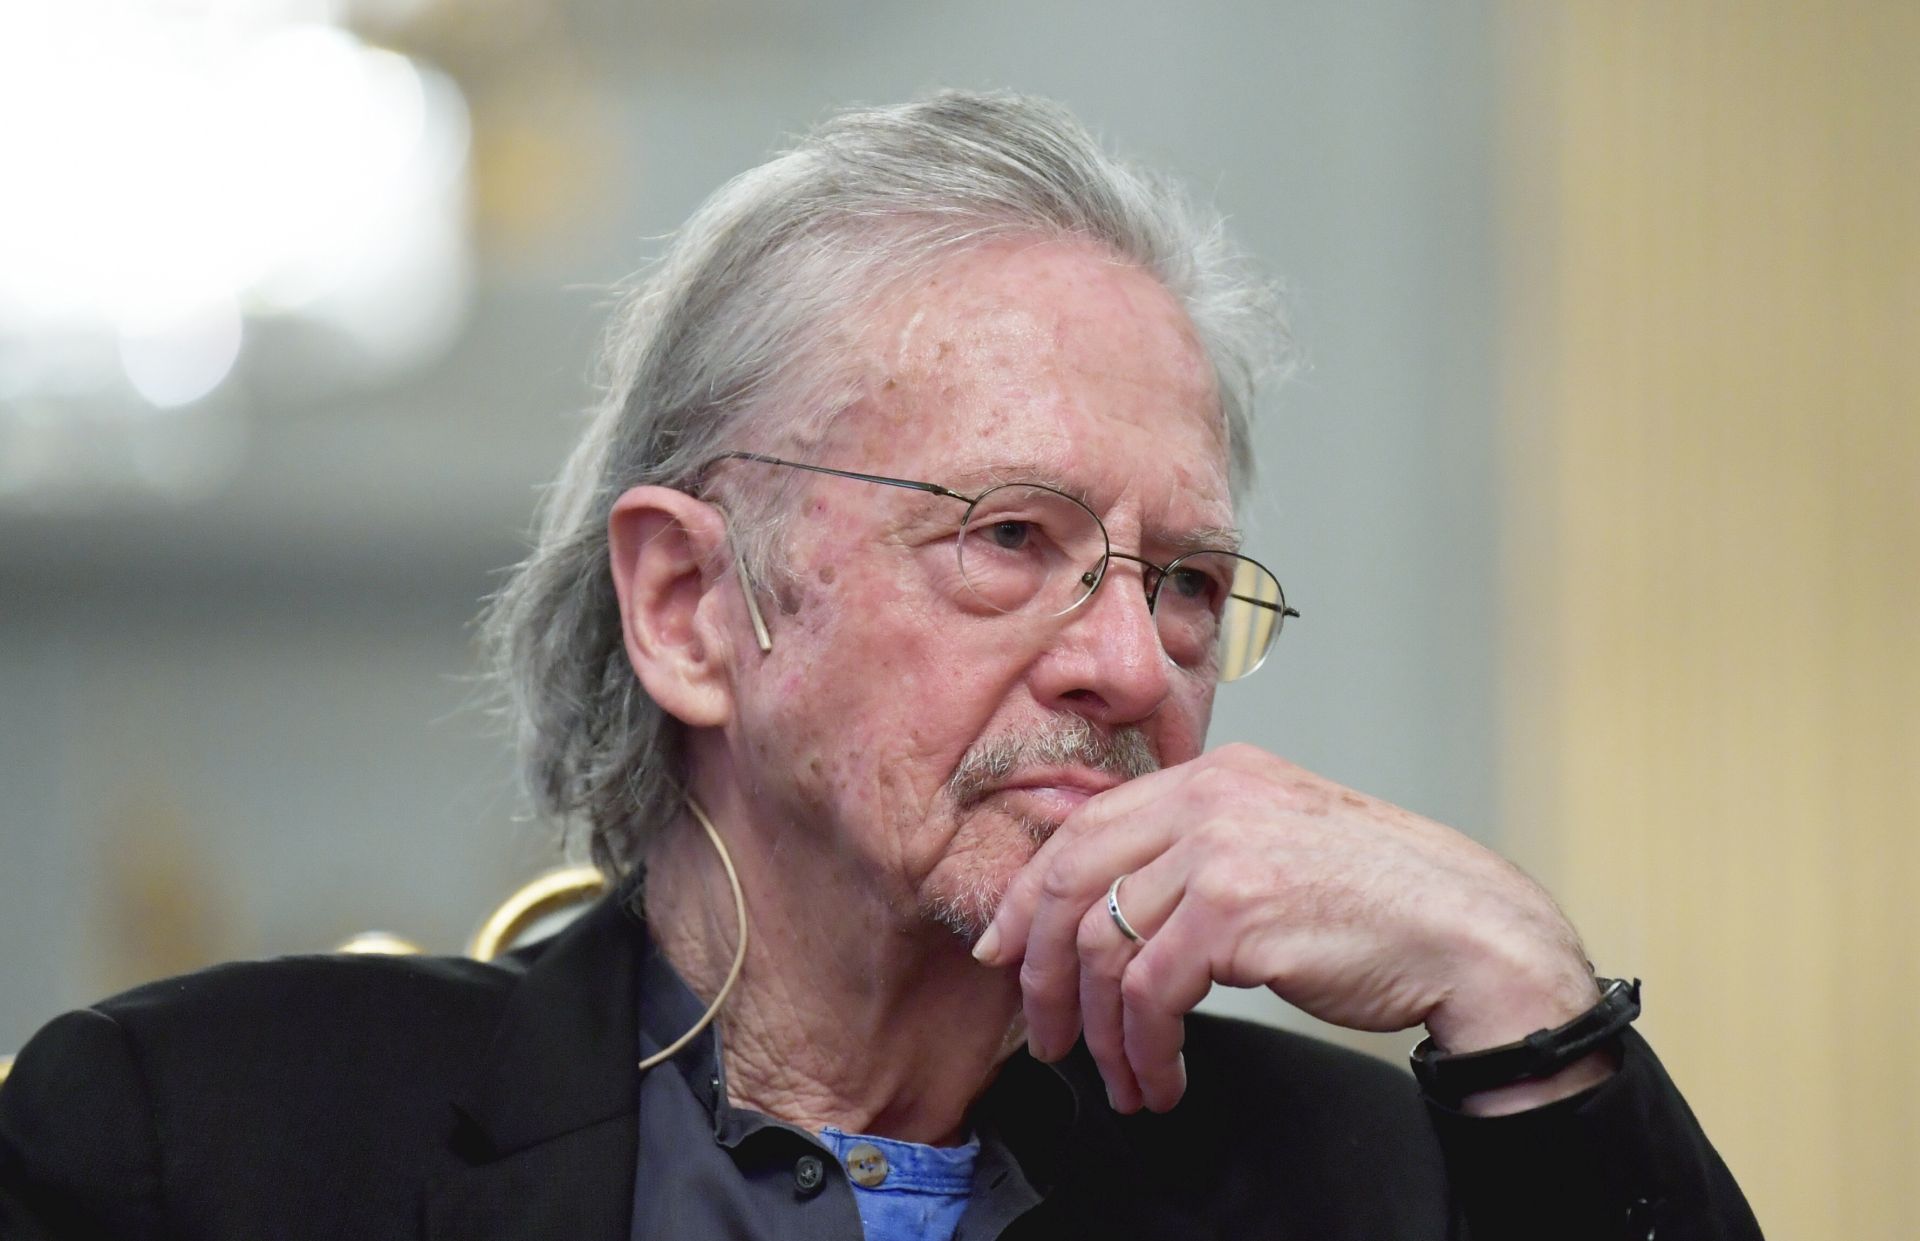 epa08048822 Austrian writer Peter Handke, Nobel Prize Literature laureate 2019, attends a press conference at the Swedish Academy in Stockholm, Sweden, 06 December 2019. The Nobel Prizes for Medicine, Physics, Chemistry, Economics and Literature will be awarded in Stockholm and the peace prize in Oslo on 10 December. Two Nobel Prize for Literature laureates were named this year because last year's prize was not awarded due to a sexual abuse scandal at the Swedish Academy. Polish Olga Tokarczuk won the Nobel Prize in Literature 2018.  EPA/Anders Wiklund  SWEDEN OUT